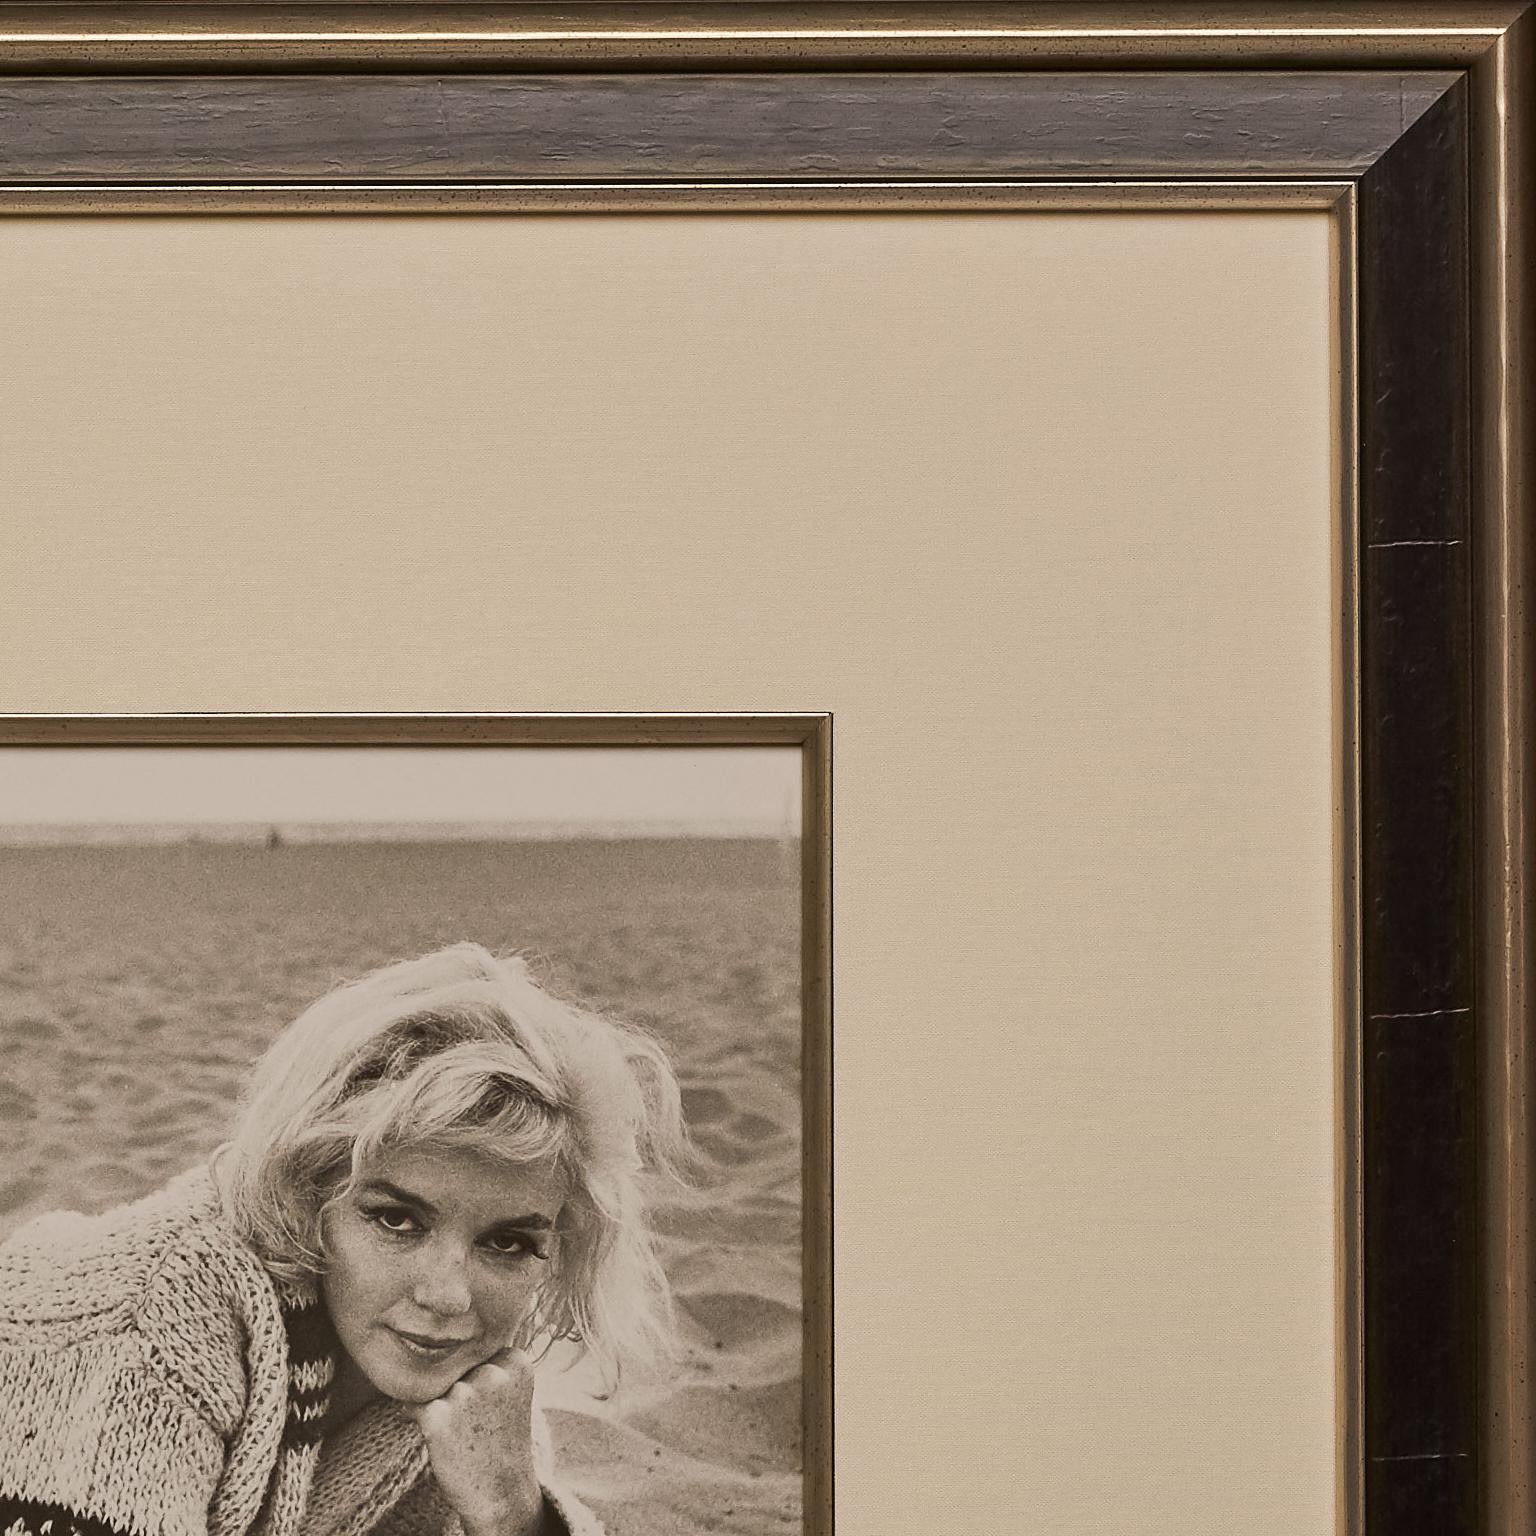 This beautiful black and white silver-gelatin photograph of Marilyn laying in the sand, wrapped up in a woollen sweater, personally belonged to photographer, George Barris. 

It measures 9 5/8 x 7 5/8 inches (24.45 x 19.37cm) and features the